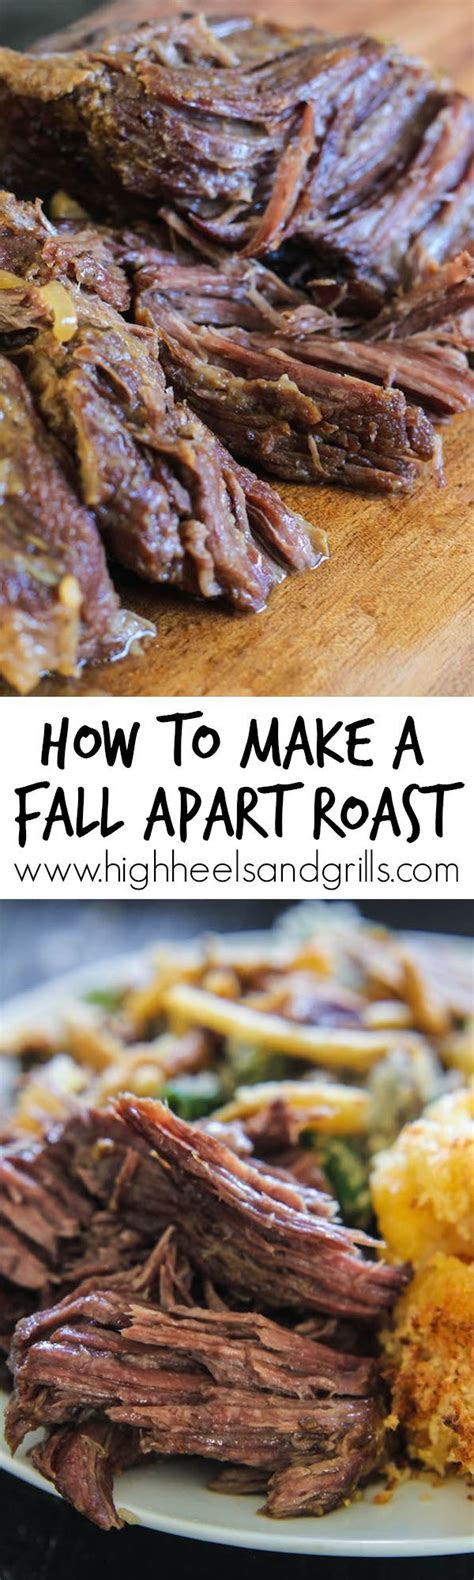 Place the pork in a shallow roasting pan and roast. How to Make a Fall-Apart Roast | Recipe | Food recipes, Meat recipes, Slow cooker recipes